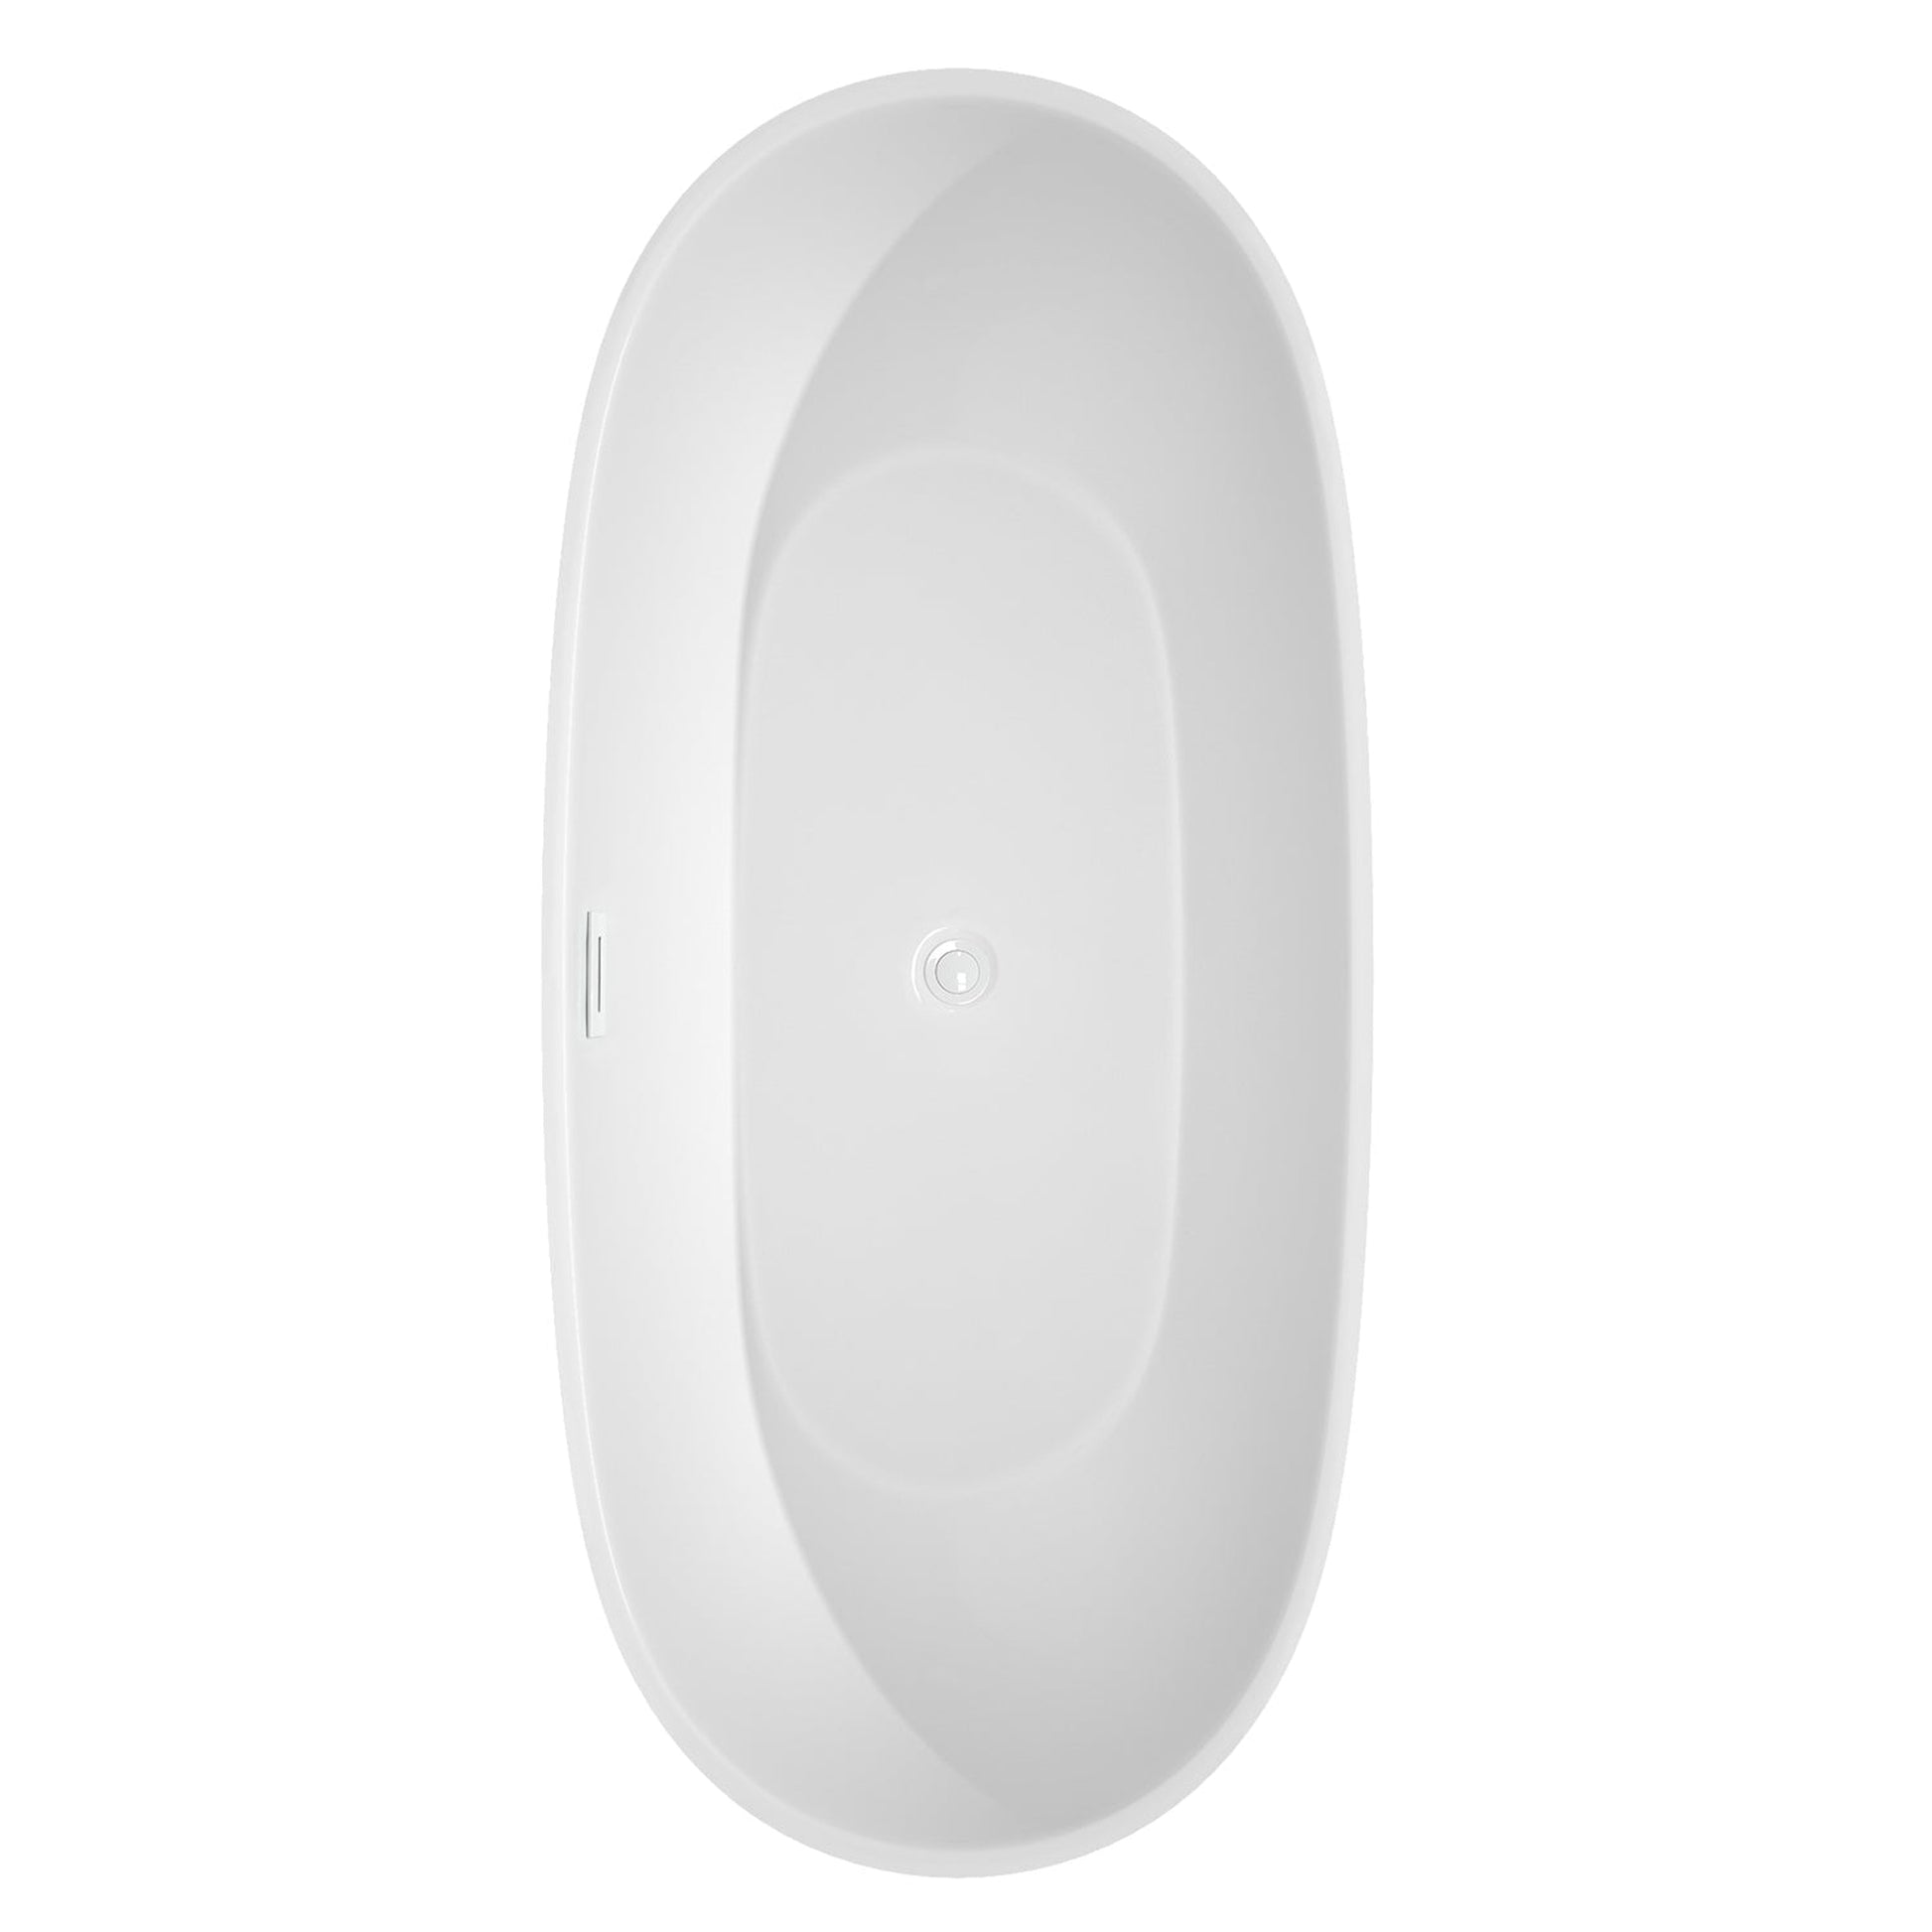 Wyndham Collection Juno 71" Freestanding Bathtub in White With Shiny White Drain and Overflow Trim